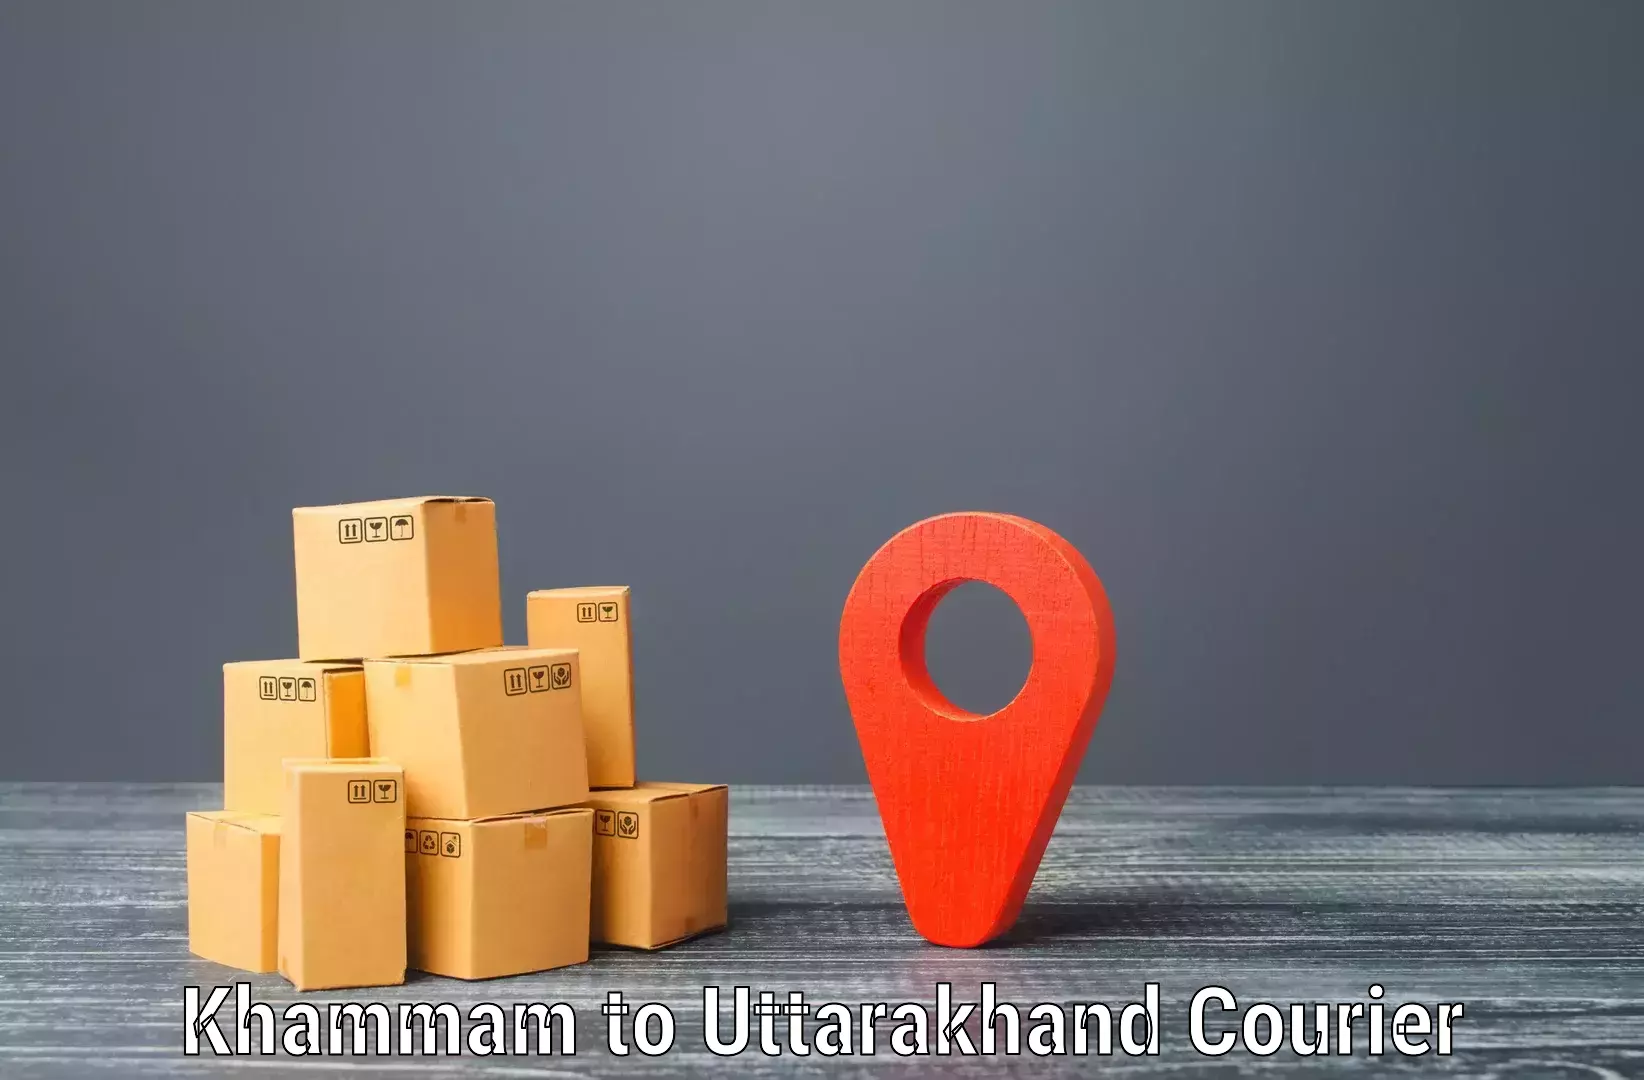 Local delivery service Khammam to Haridwar